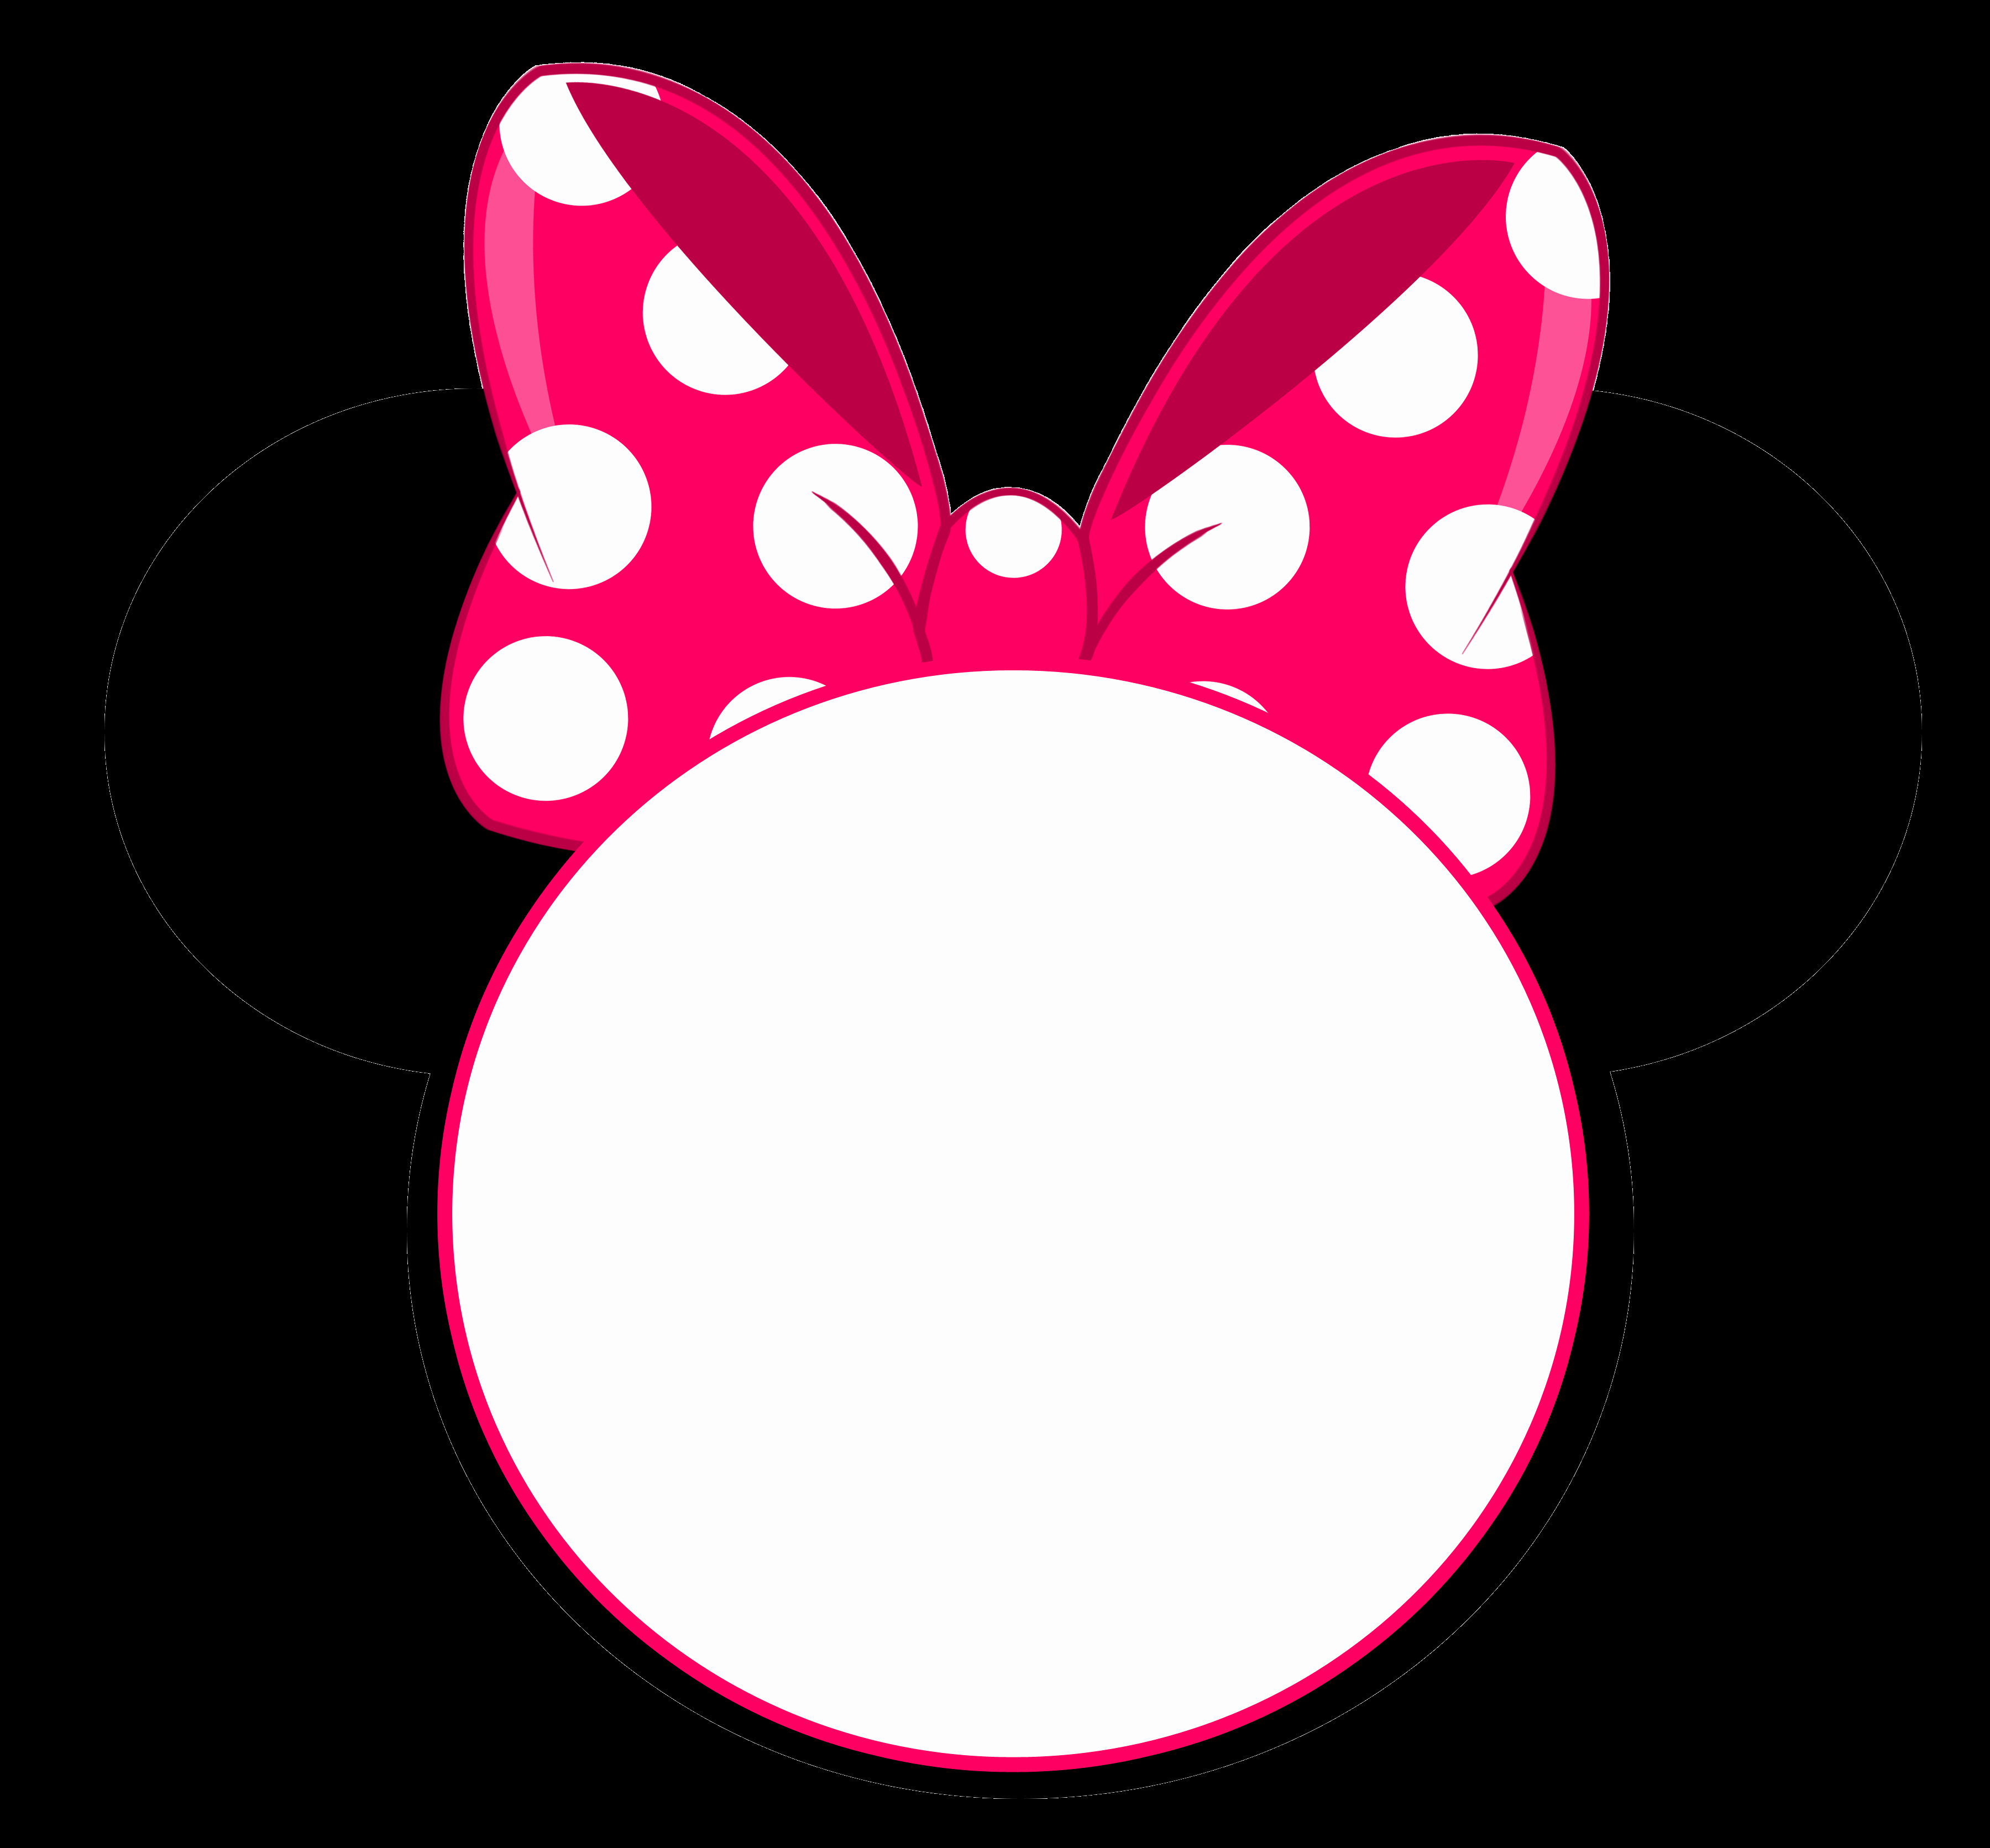 Free Printable Minnie Mouse Bow Template Luxury Free Minnie Mouse Head In.....